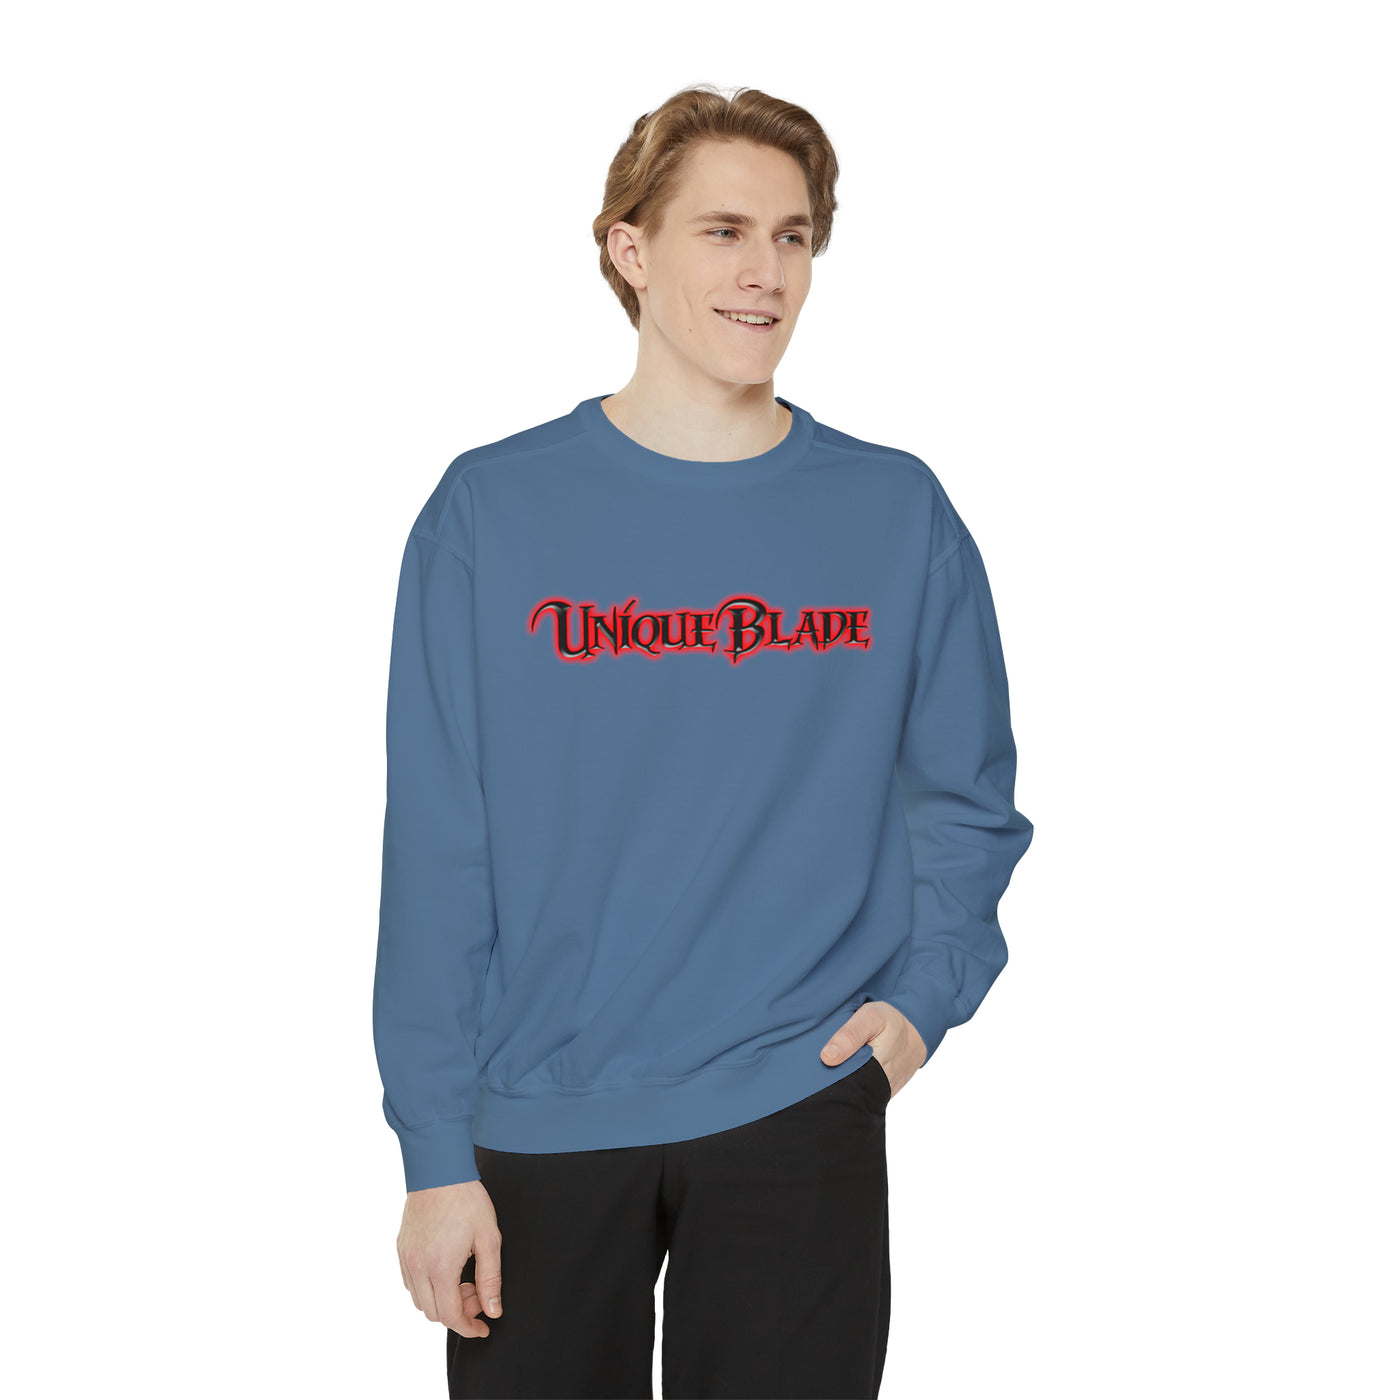 Unisex Garment-Dyed Sweatshirt - Comfortable and versatile sweatshirt suitable for both men and women, featuring a unique garment-dyed finish for a vintage appearance and cozy feel.